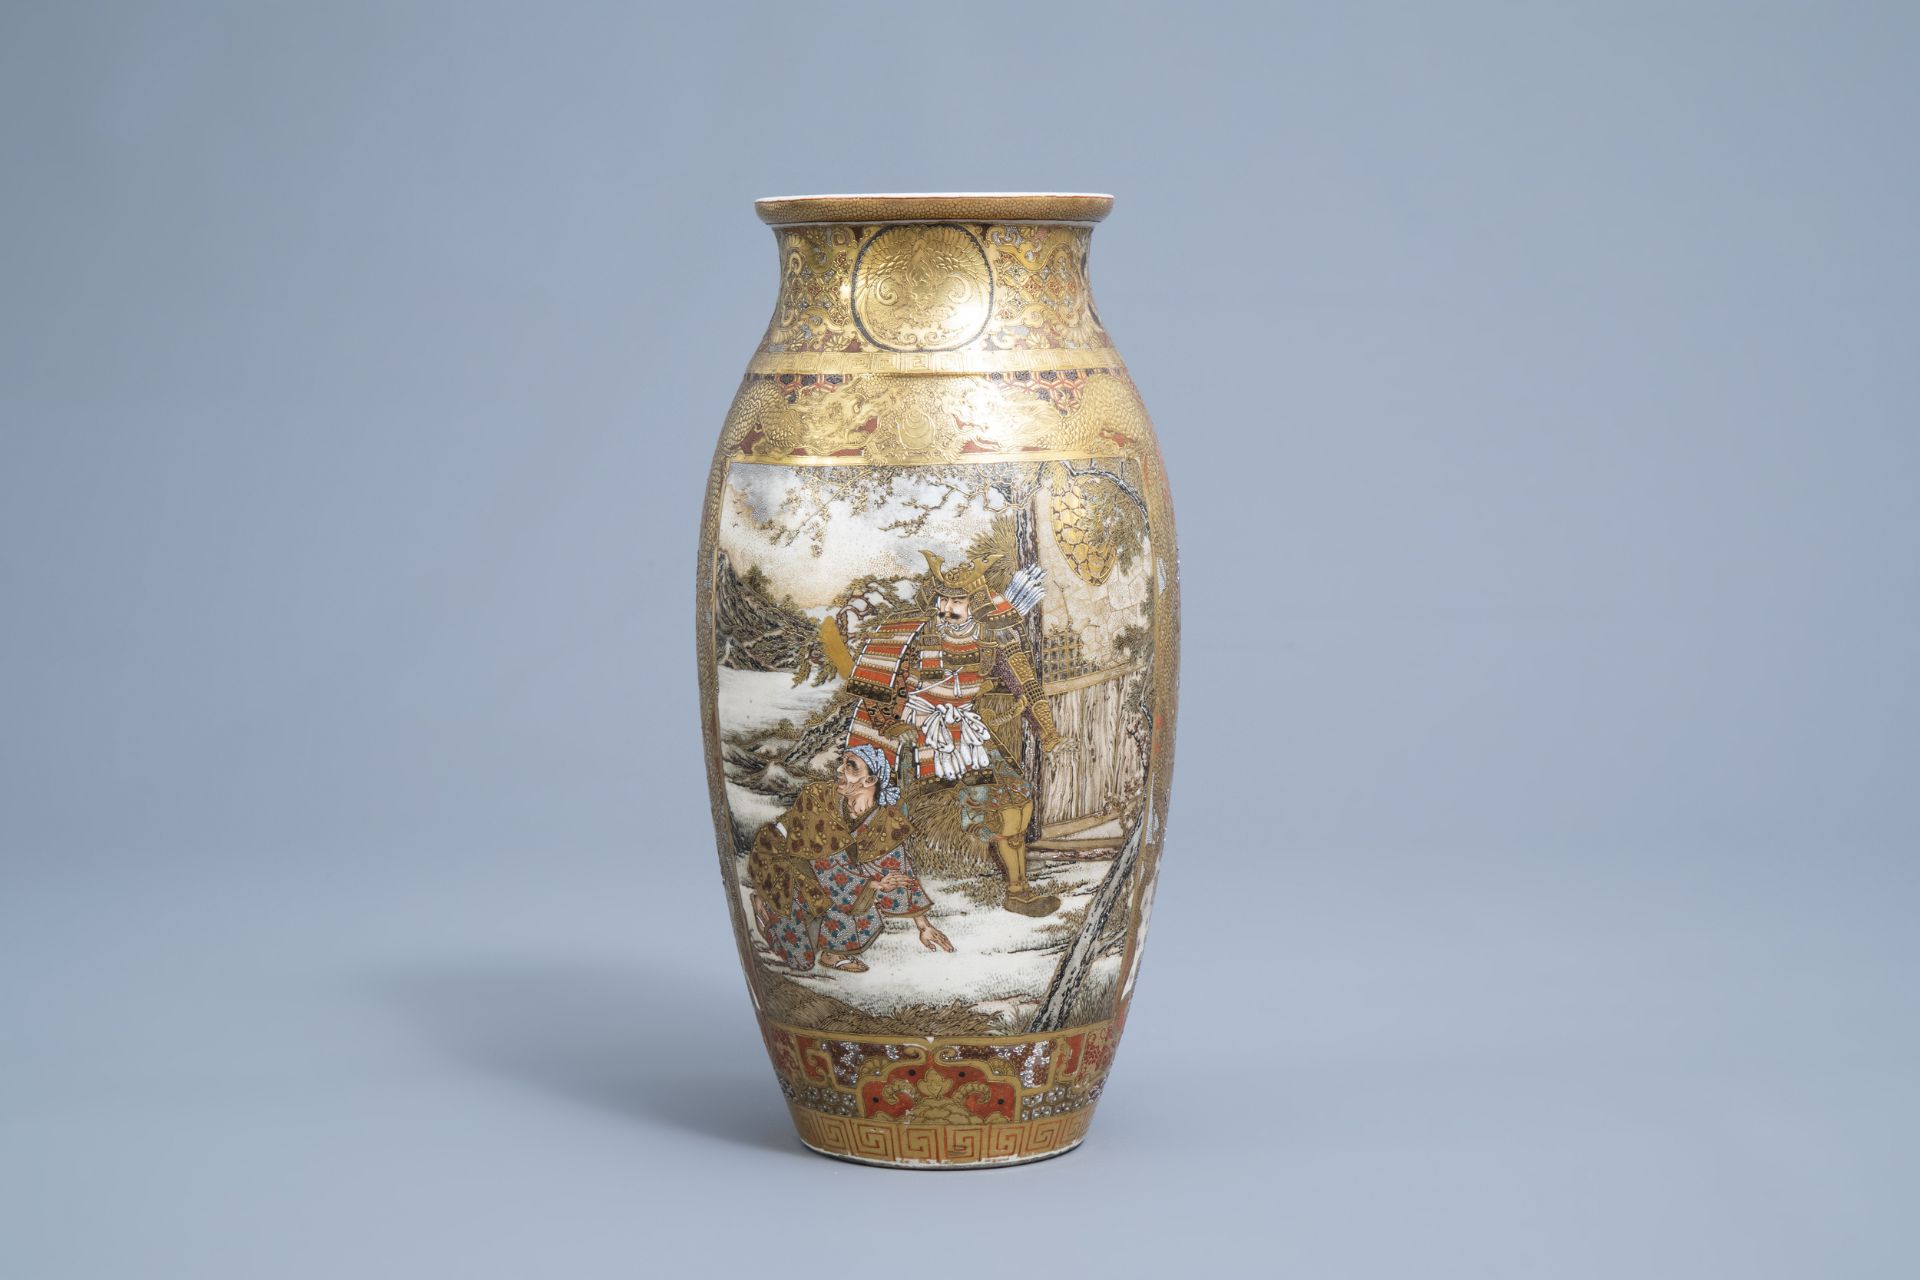 A Japanese Satsuma vase with figures and a samurai in a landscape, Meiji, 19th C. - Image 5 of 7